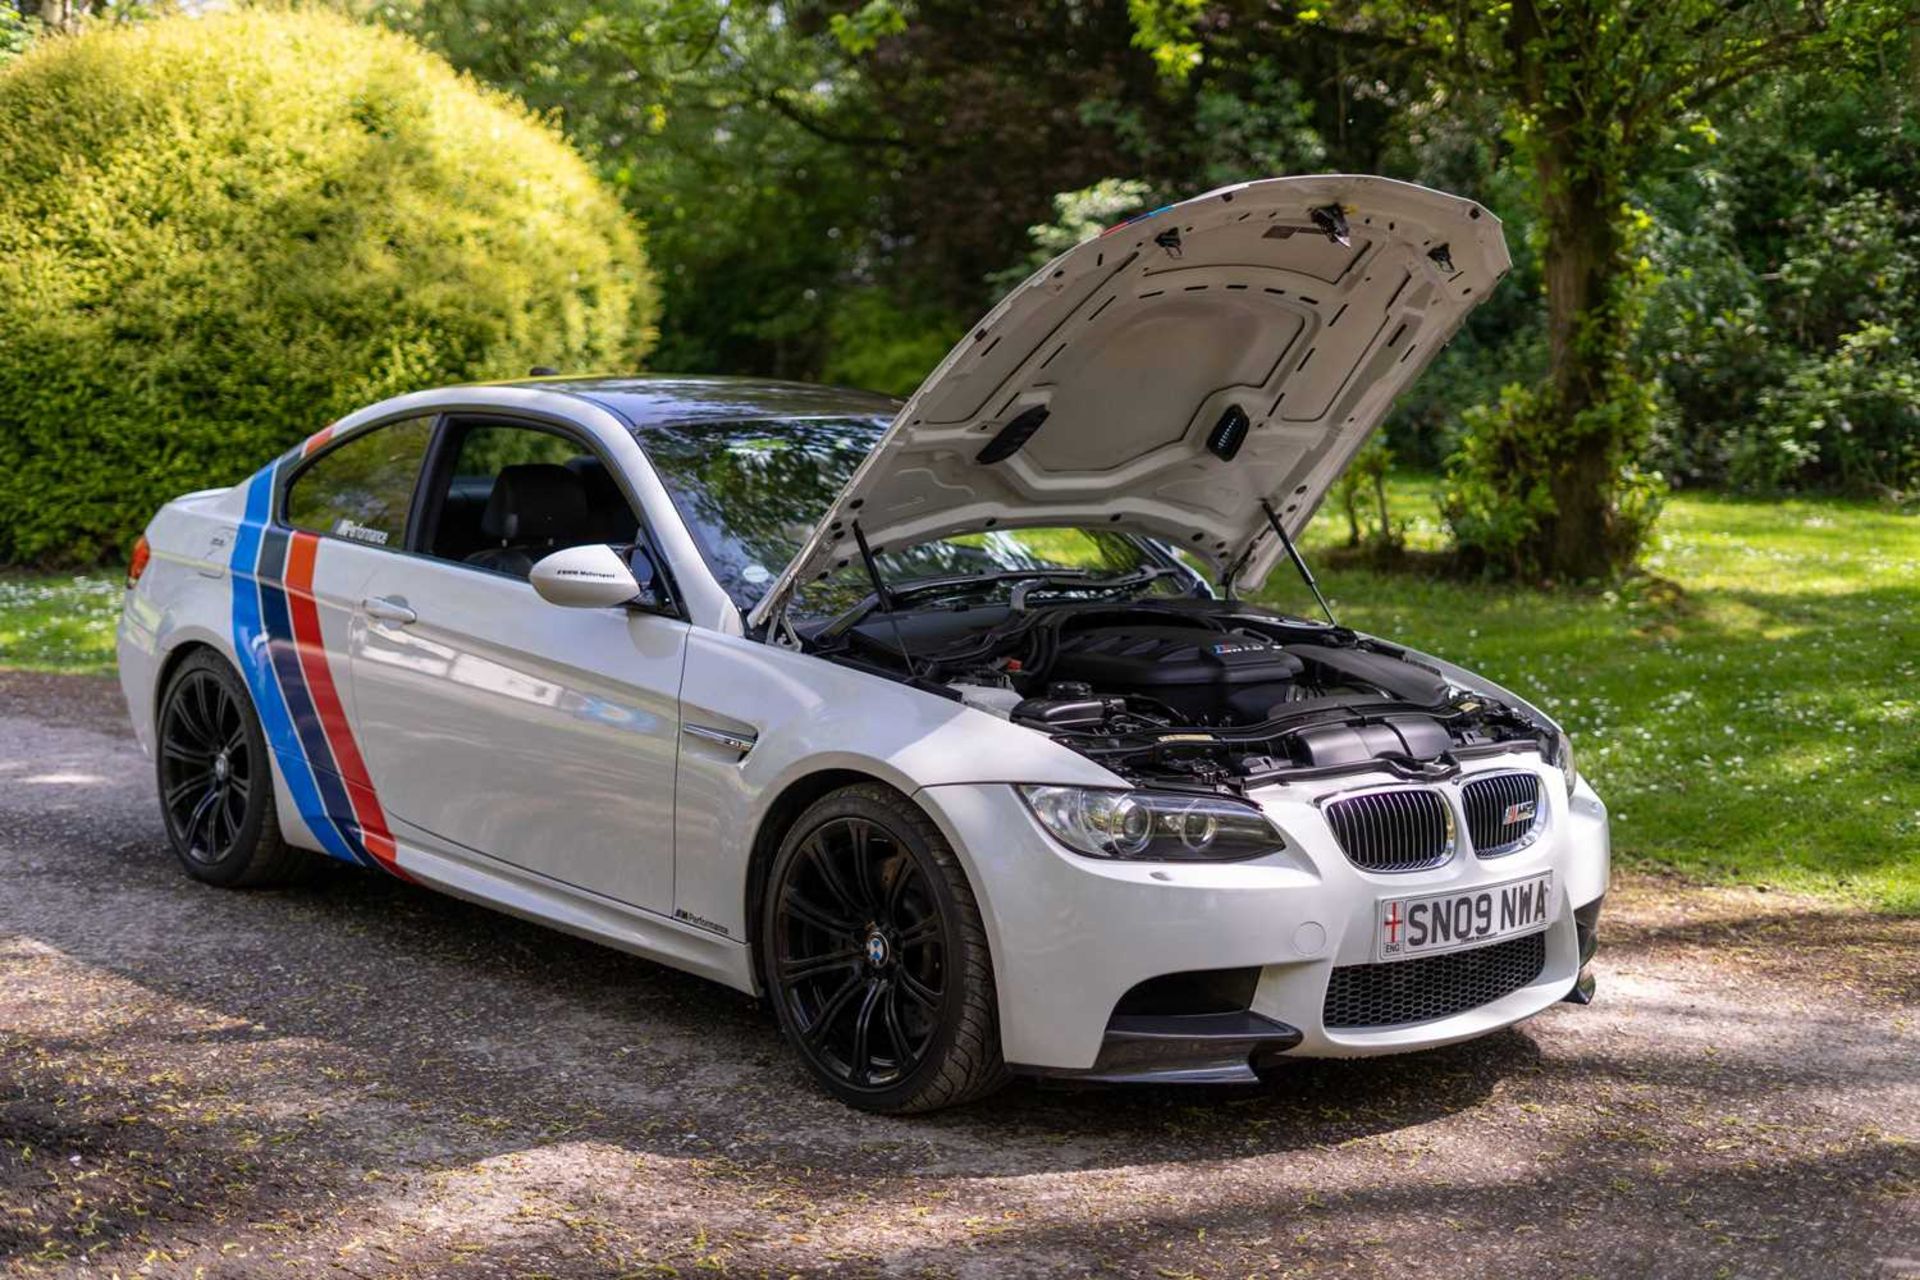 2009 BMW E92 M3  Sought after manual gearbox - Image 57 of 65